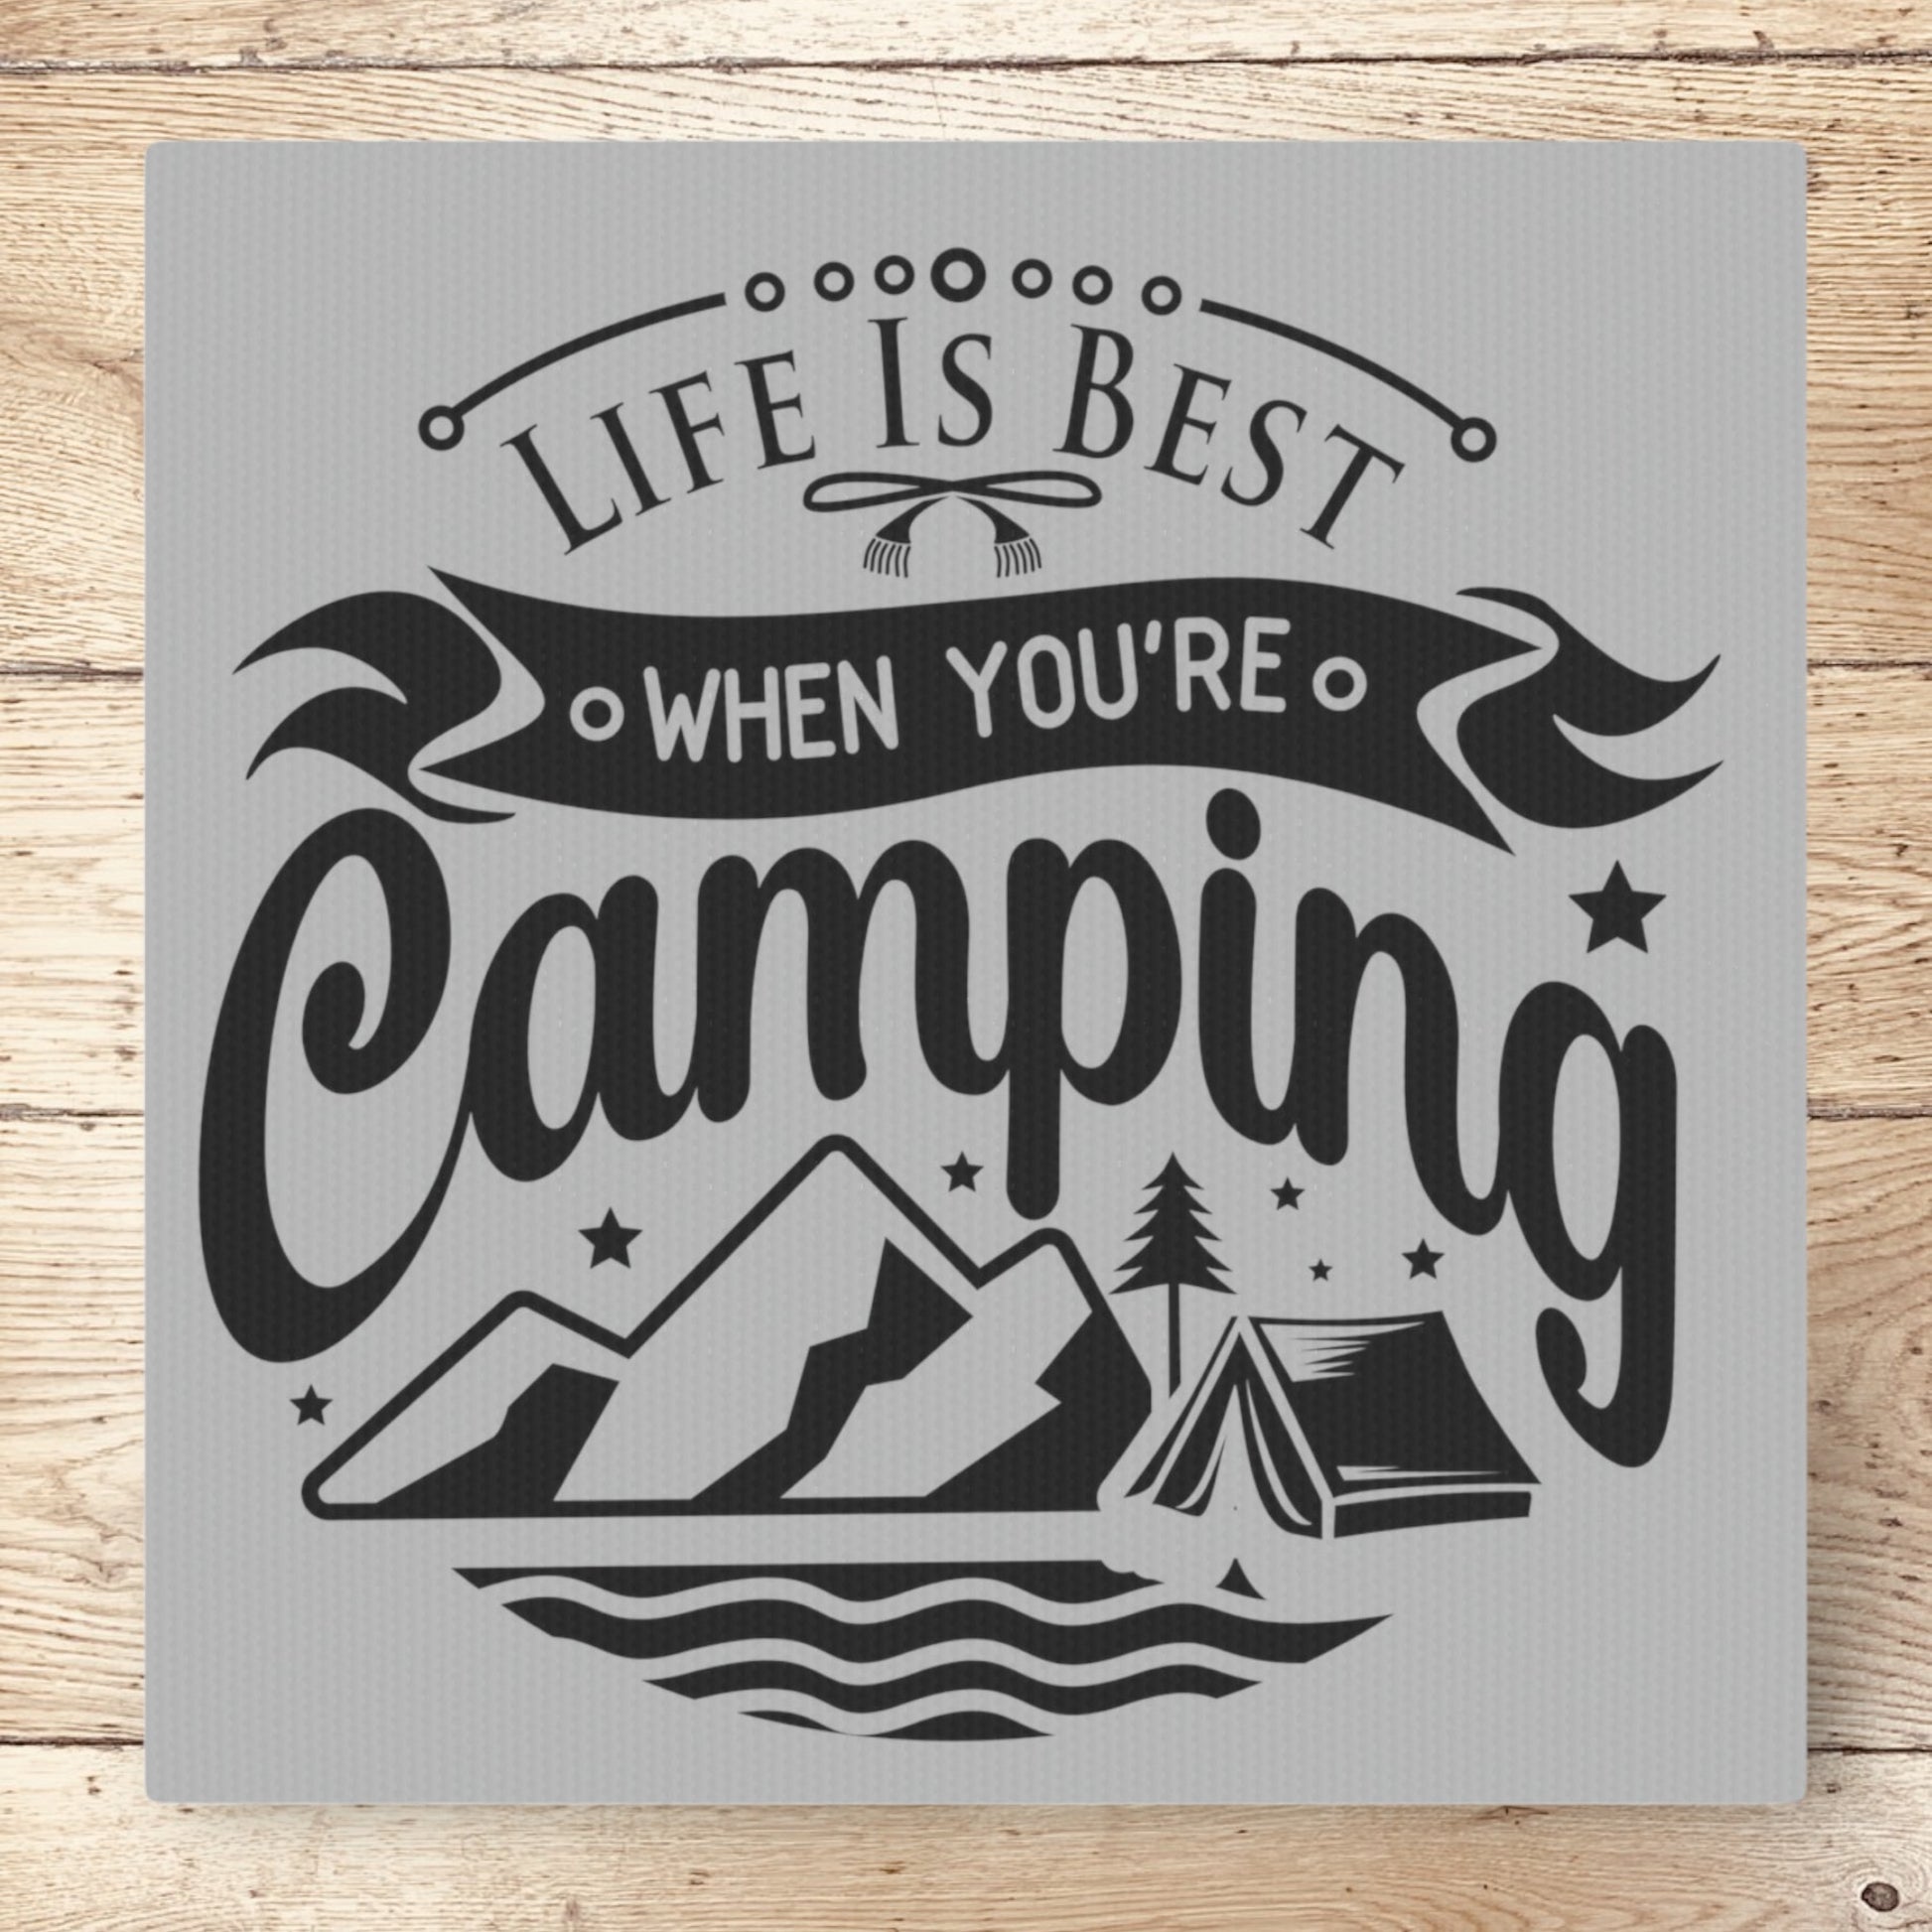 "Life Is Best When You're Camping" Canvas Photo Tile - Weave Got Gifts - Unique Gifts You Won’t Find Anywhere Else!